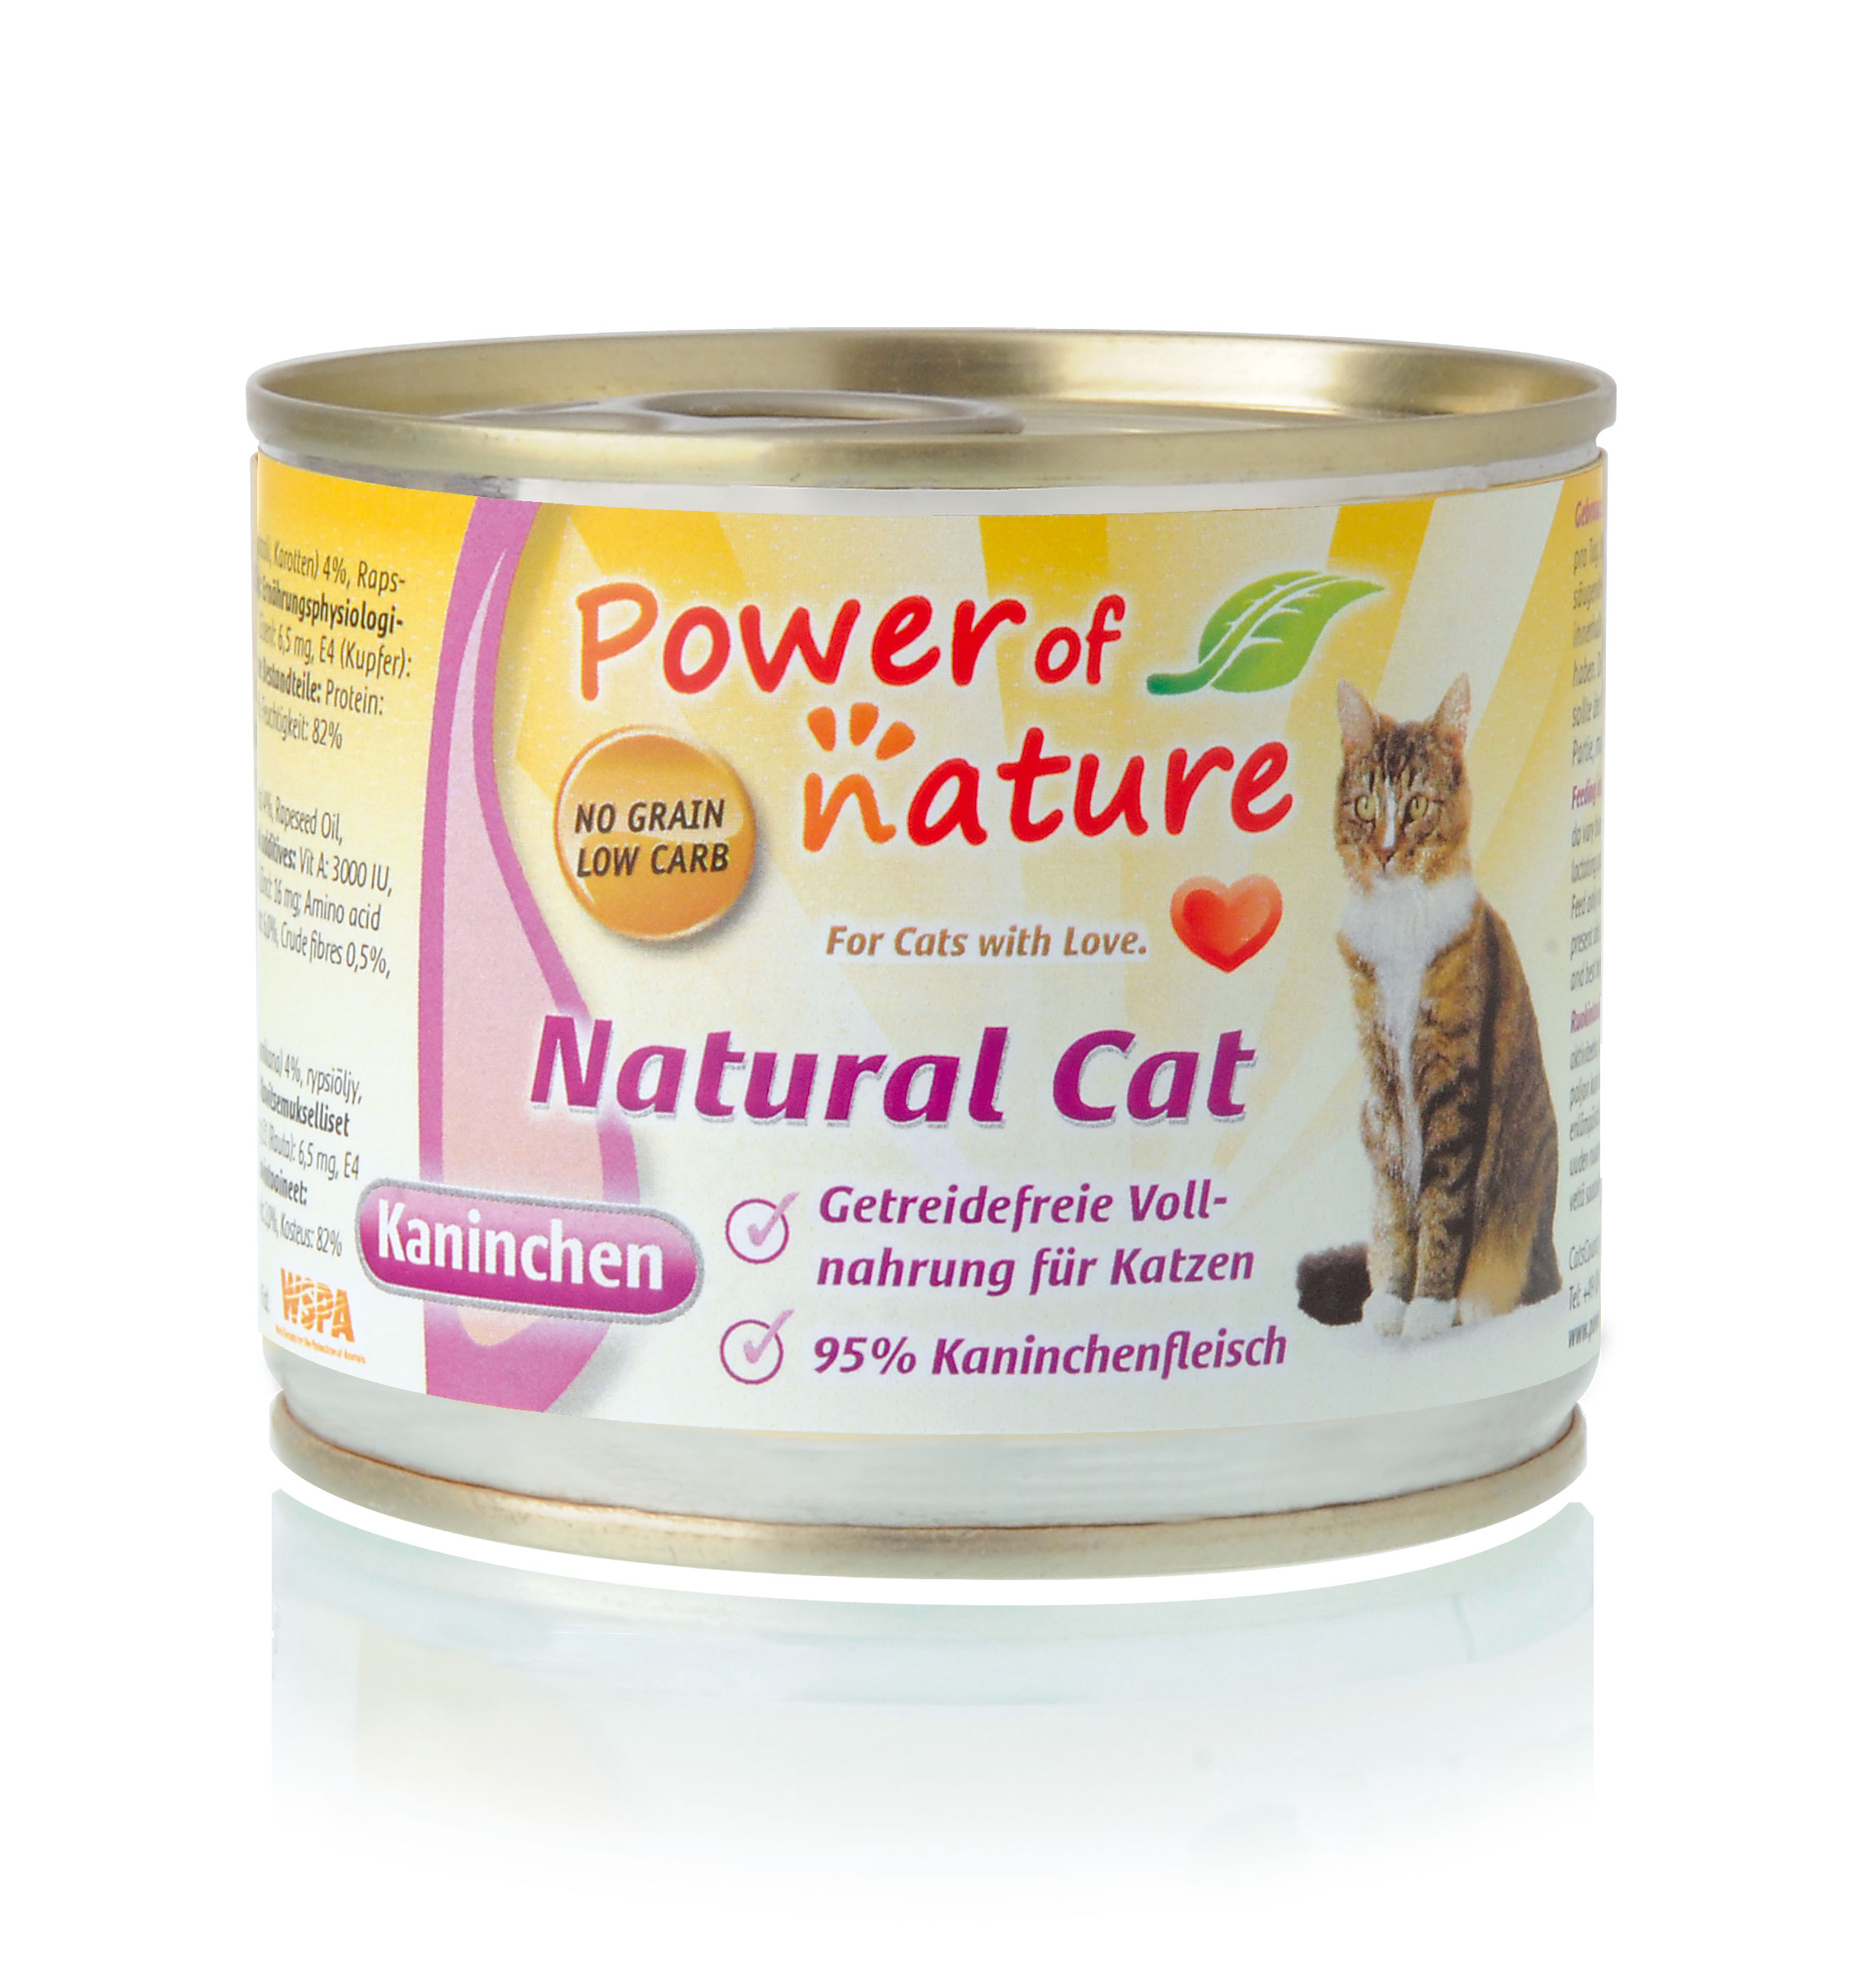 Power of Nature Natural Cat Dose Kaninchen 24 x 200g